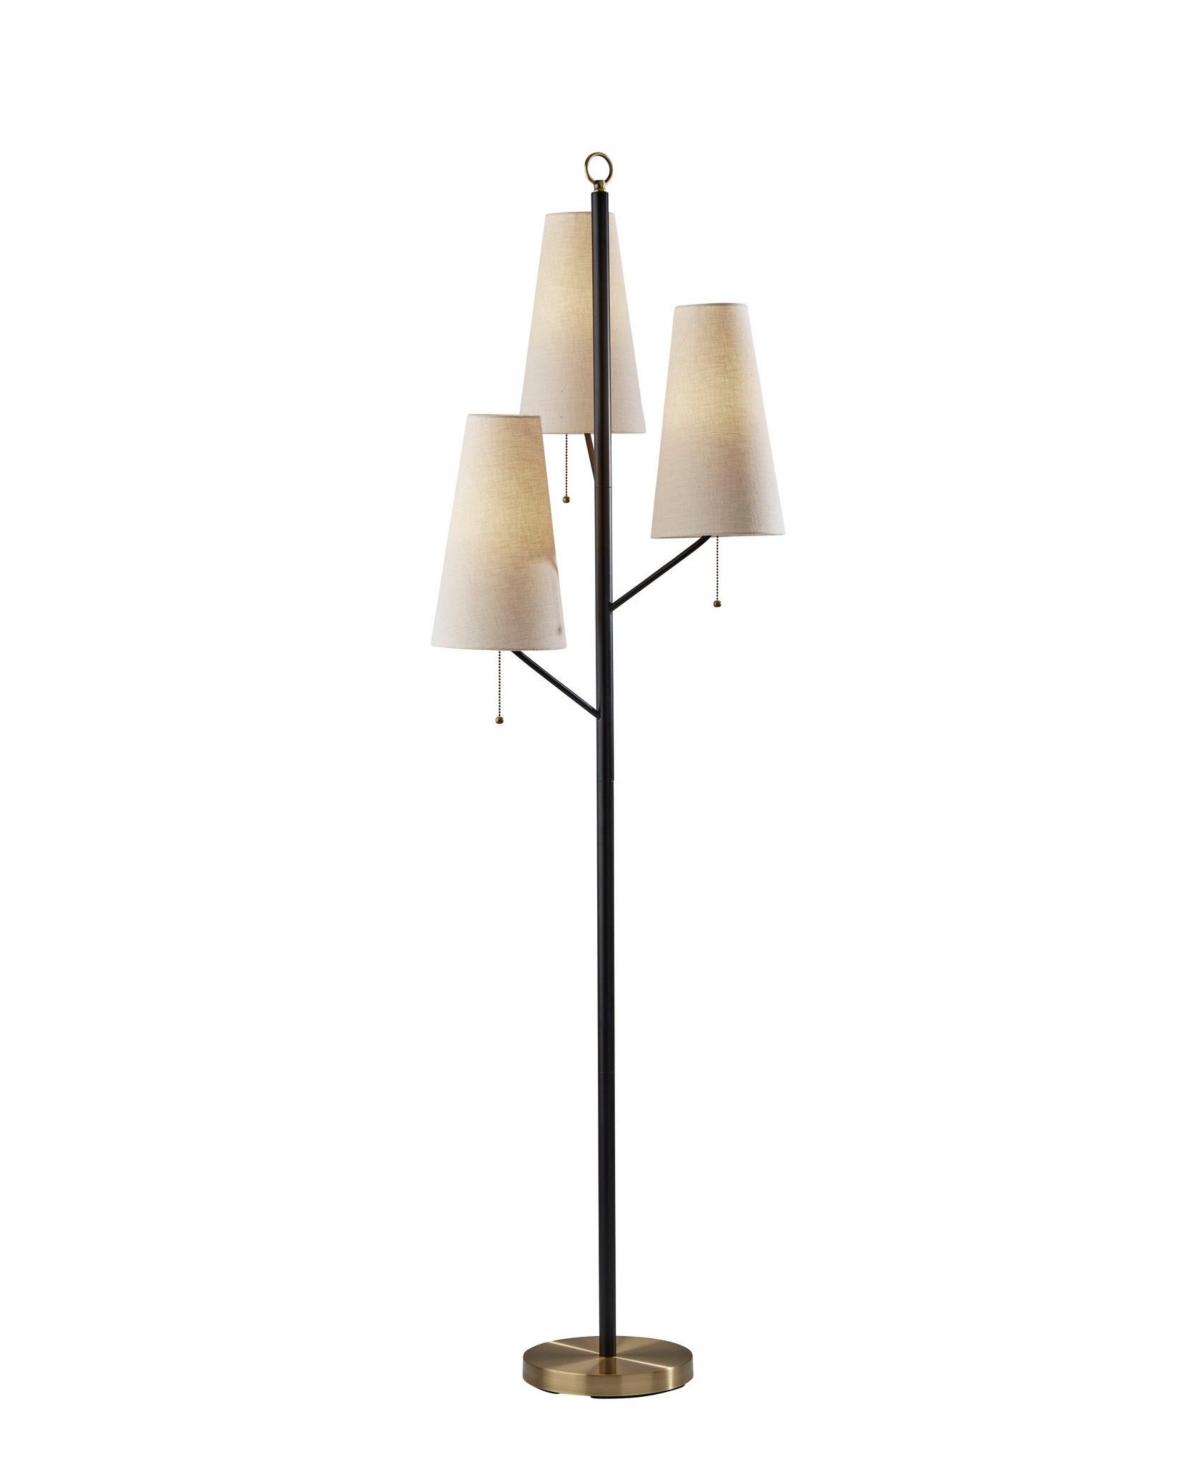 Adesso Daniel Floor Lamp In Black With Antique-like Brass Accents